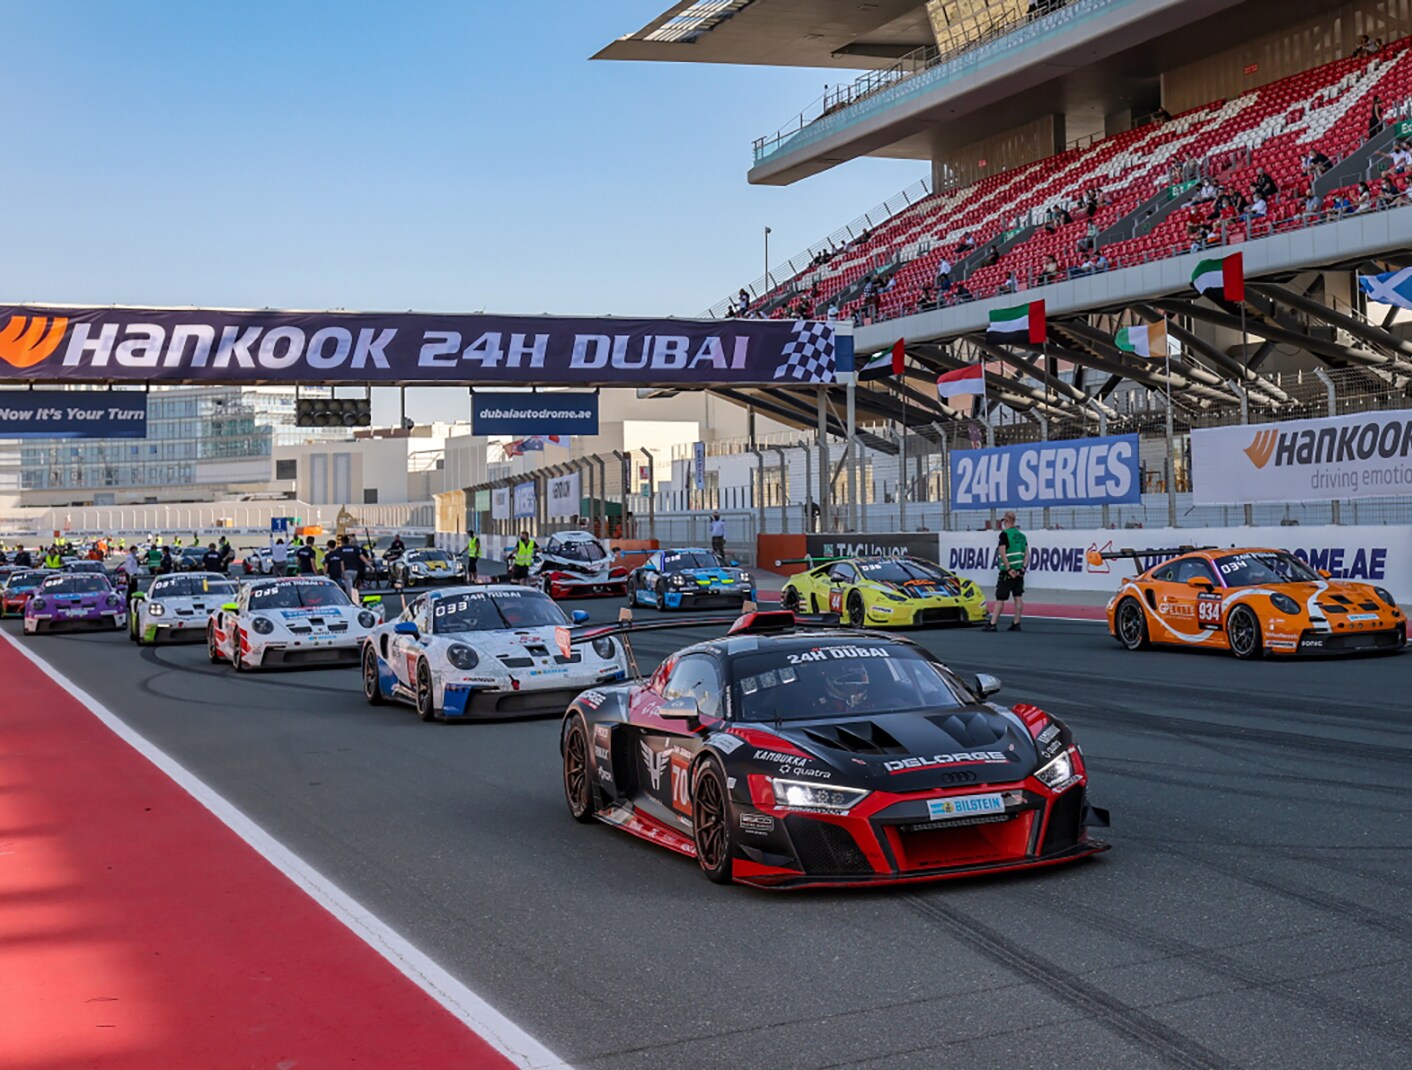 A round number: Hankook and the 24H Series kick off their tenth season together in Dubai